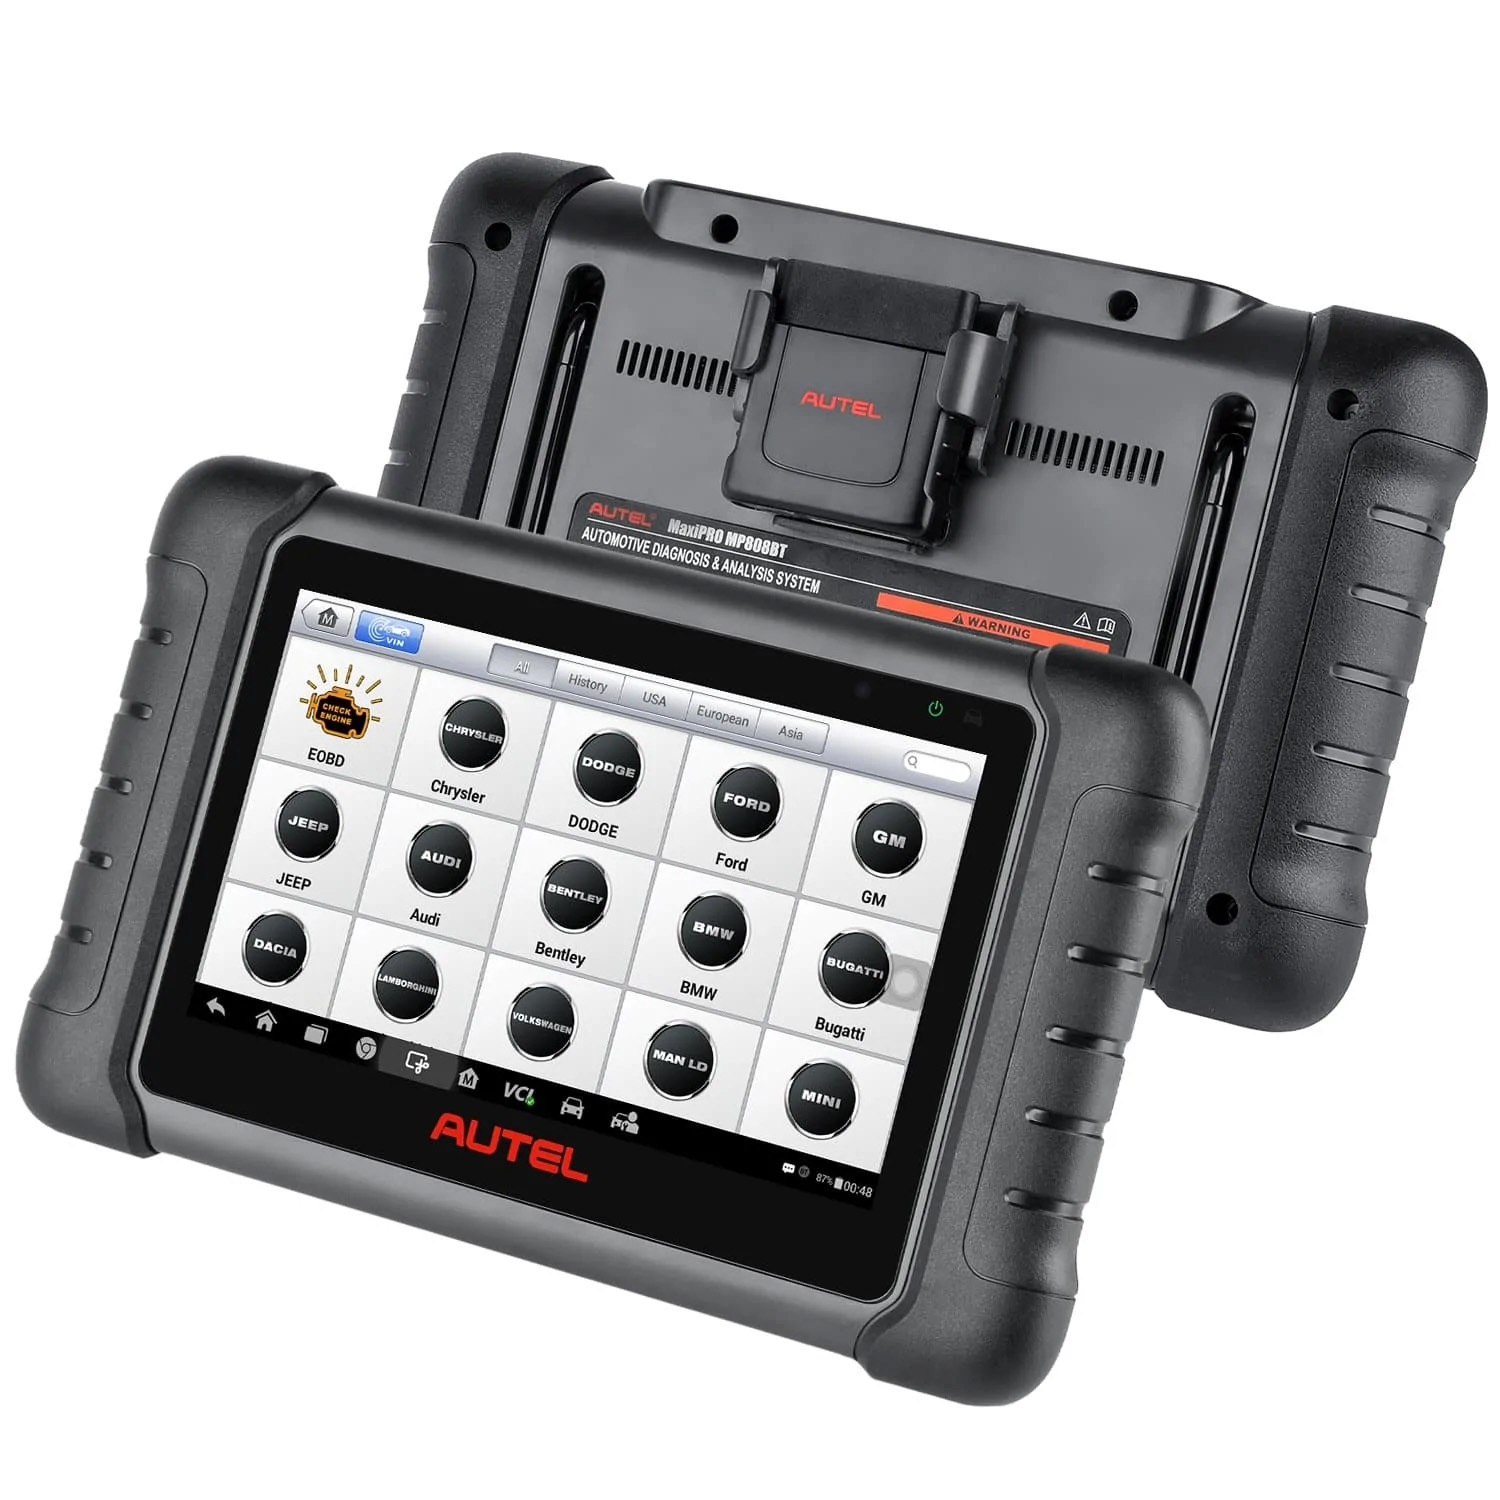 Autel MaxiPRO MP808S KIT with Complete OBD1 Adapters Newly Adds